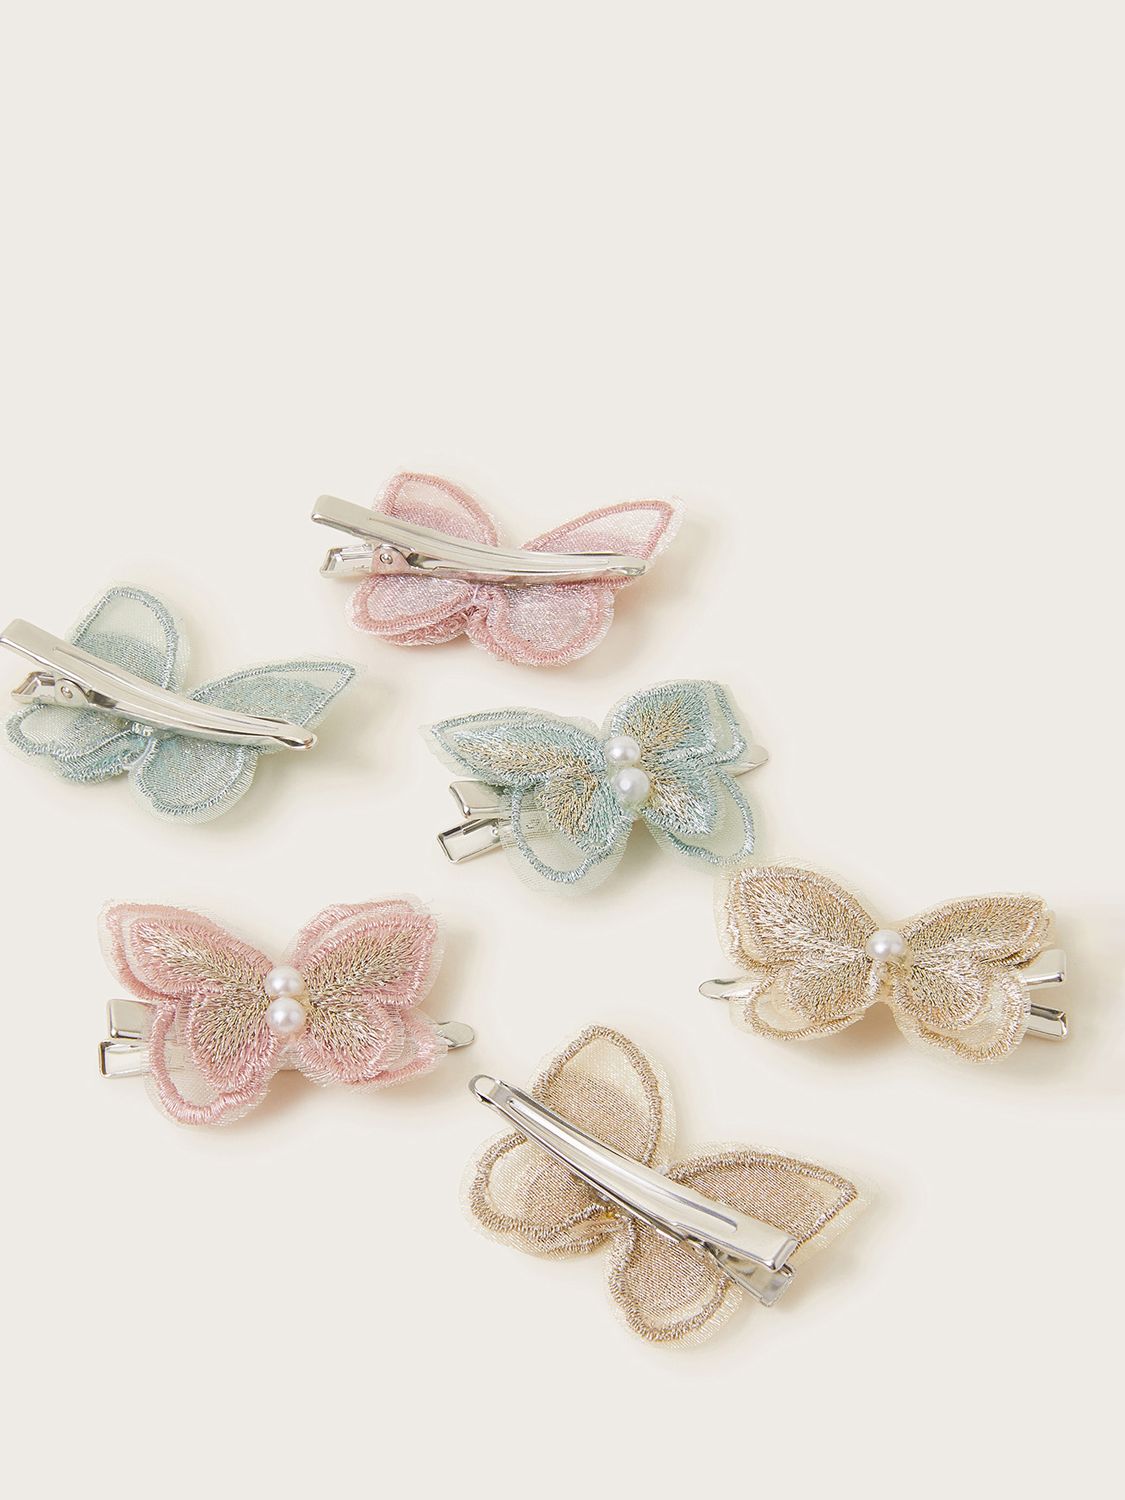 Buy Monsoon Kids' Butterfly Clip, Pack of 6, Multi Online at johnlewis.com